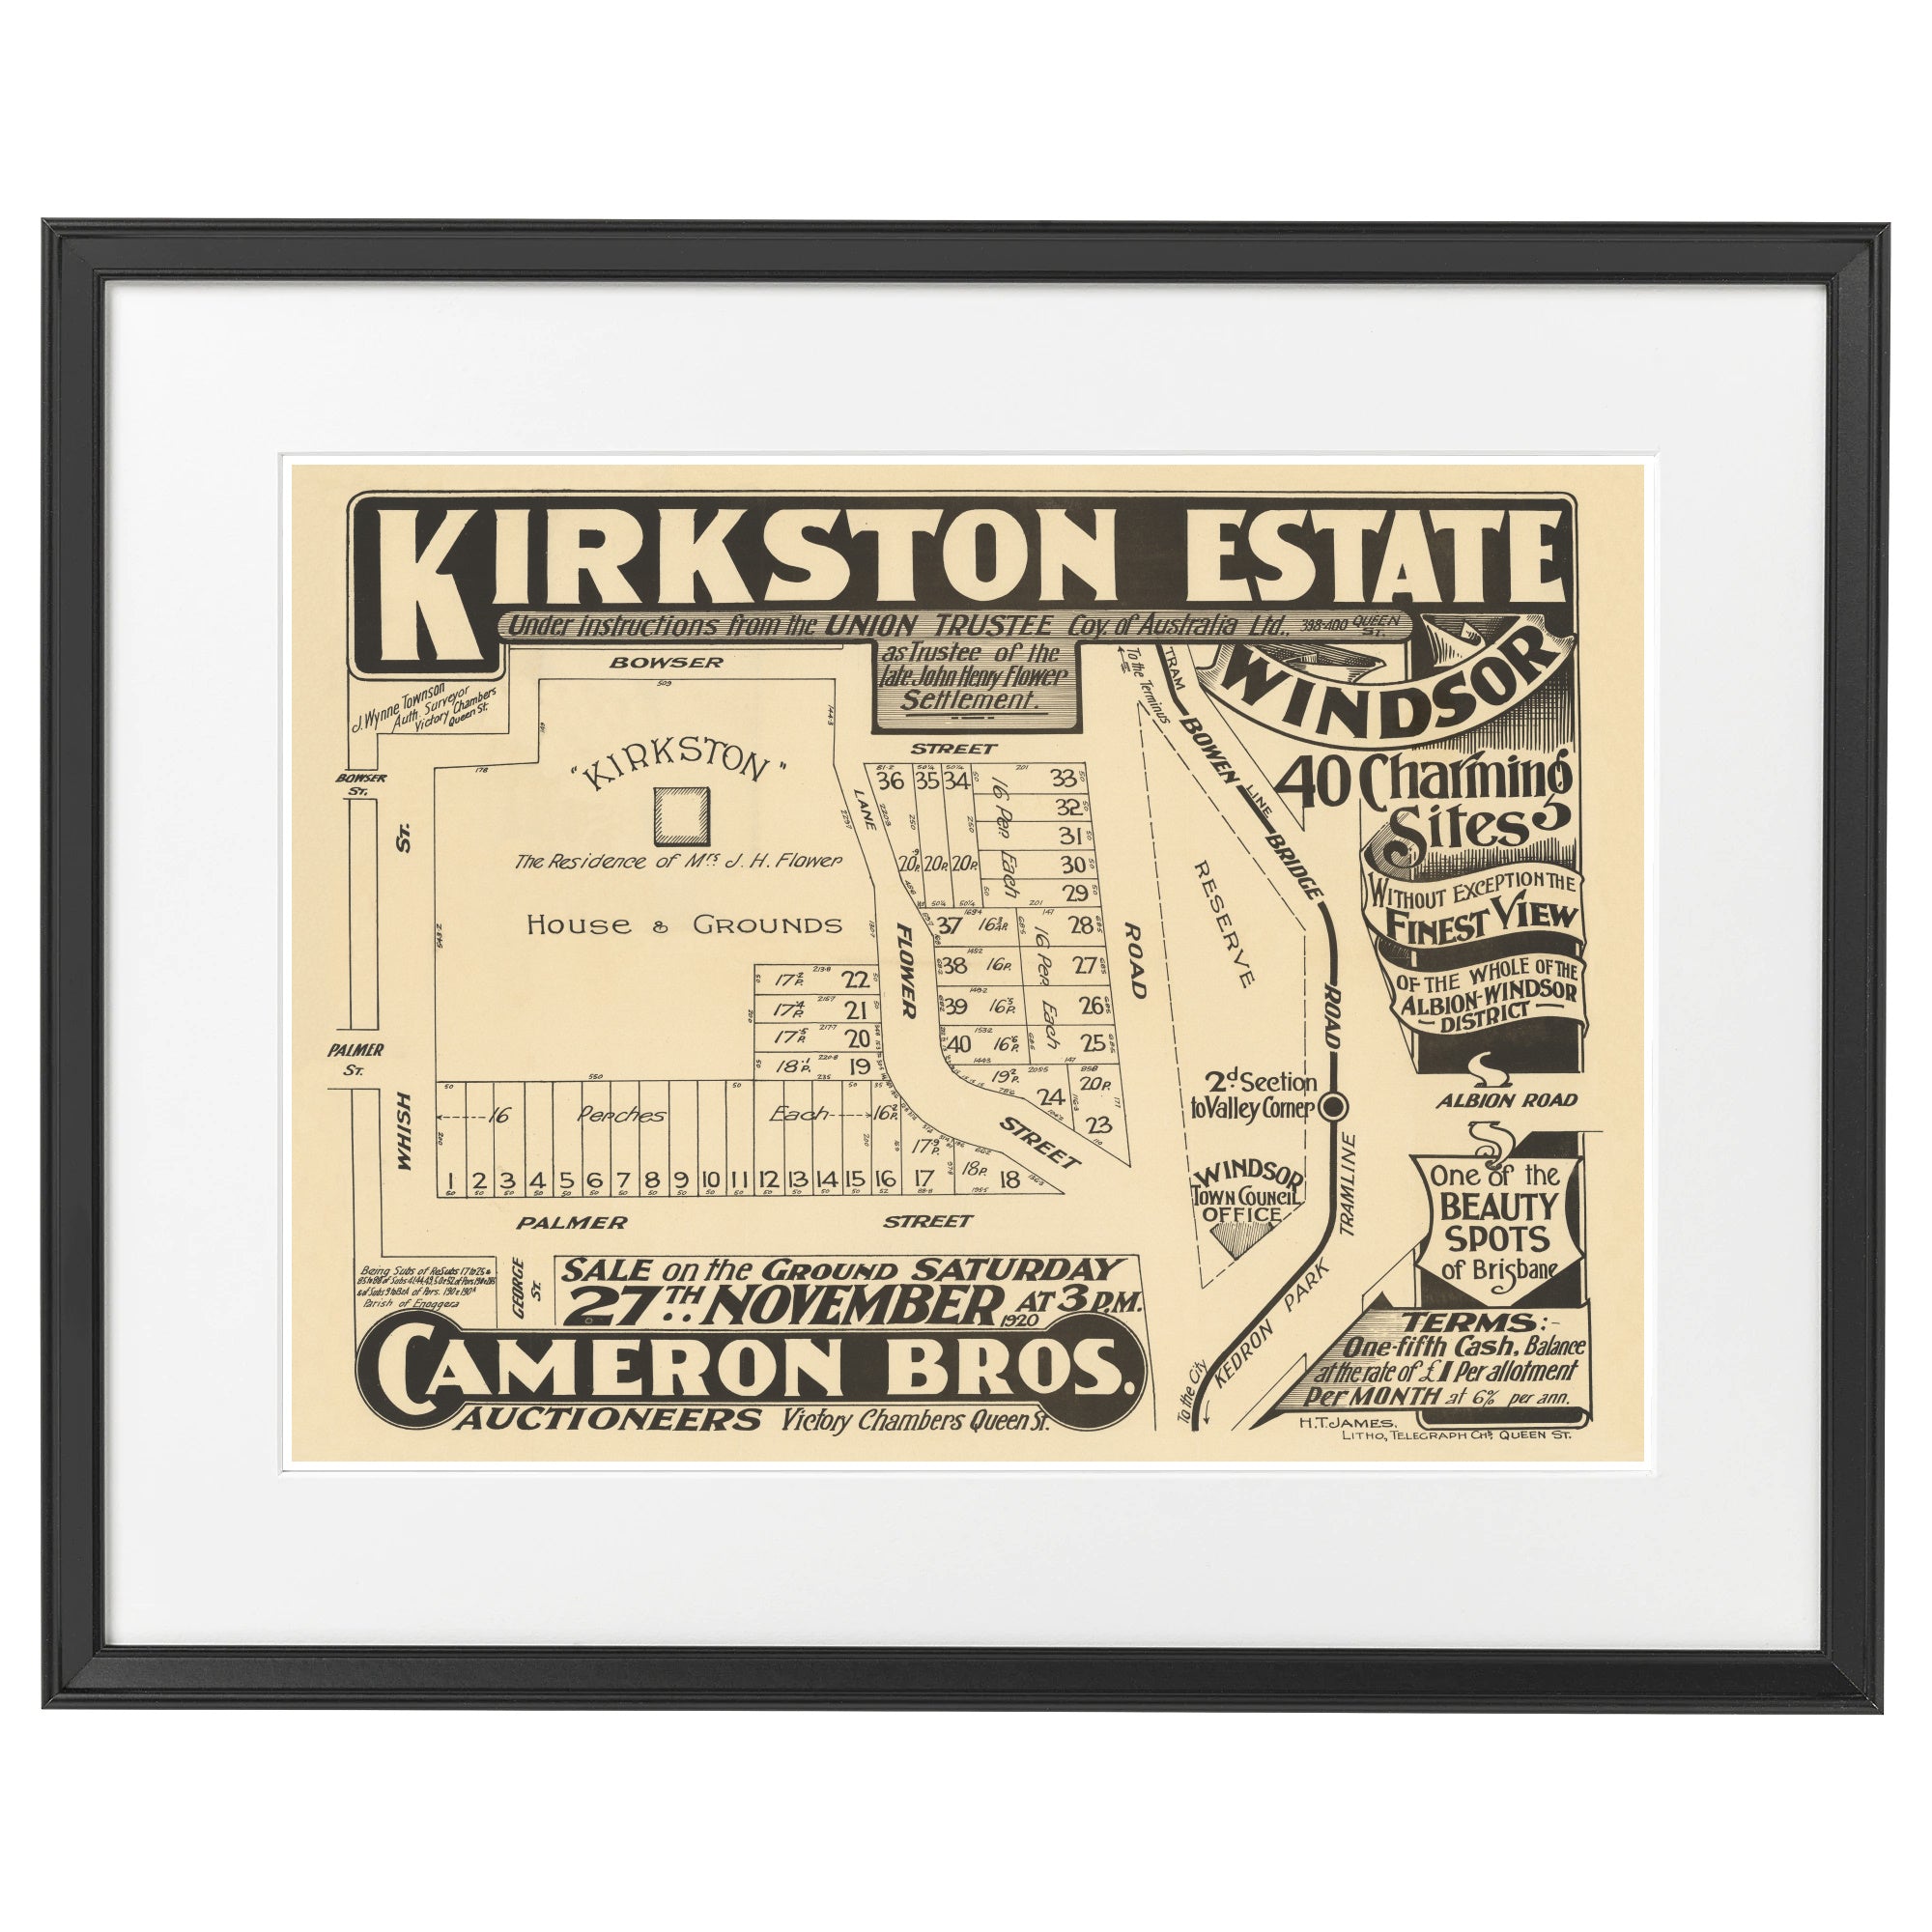 100 years old today - Kirkston Estate - Windsor